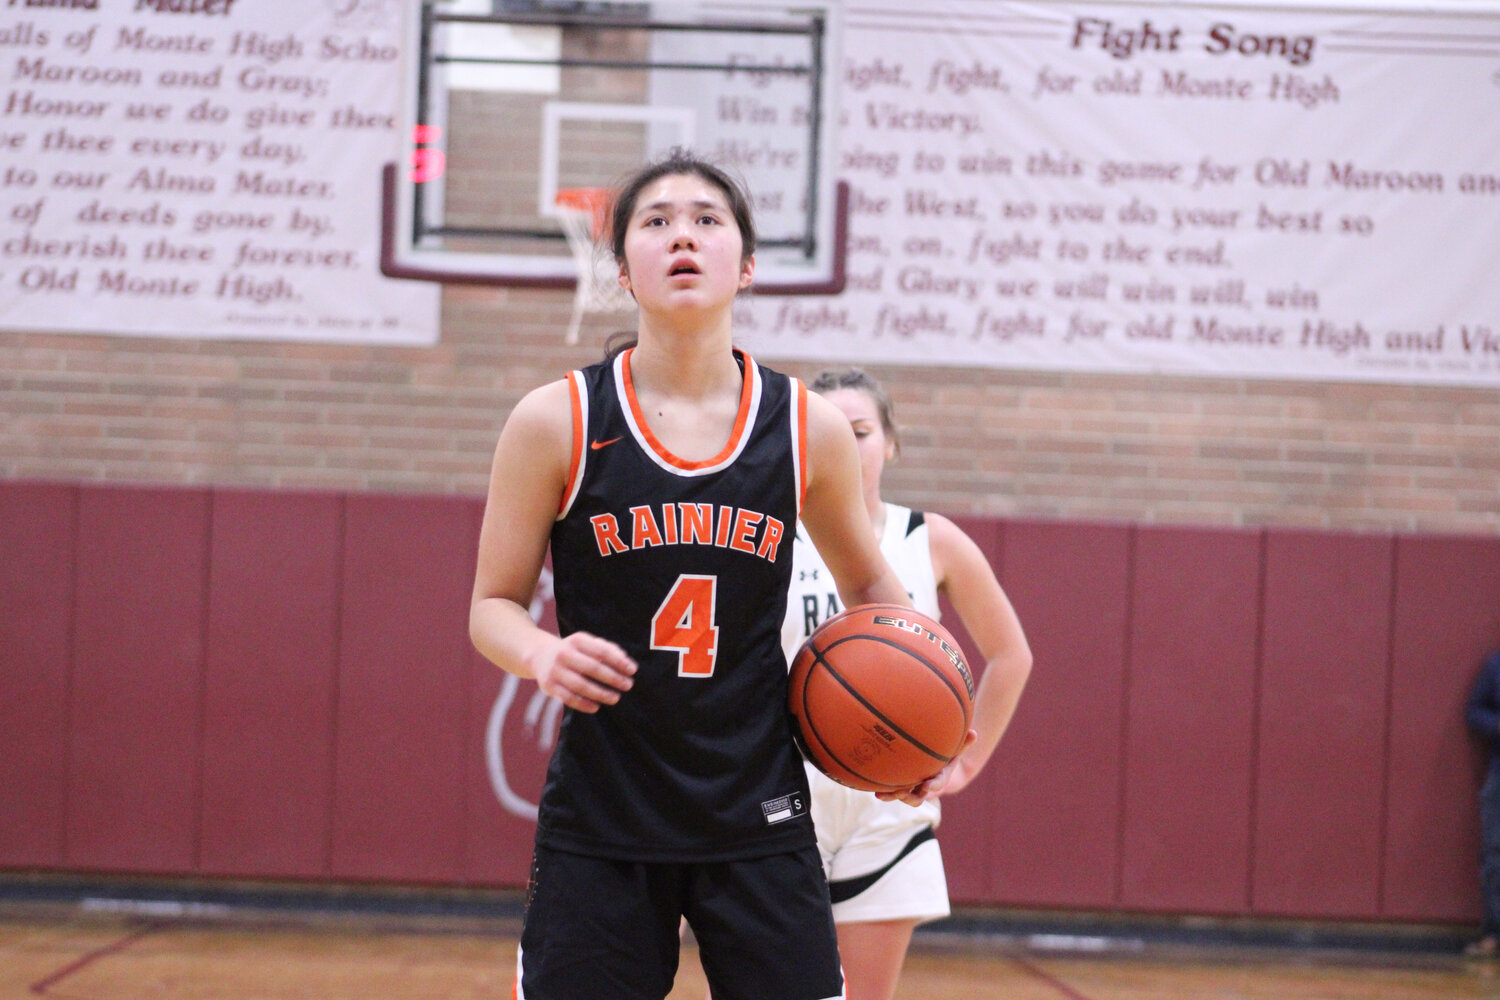 Angelica Askey prepares for a free throw against Raymond-South Bend on Feb. 6. Askey finished with 25 points in the victory.